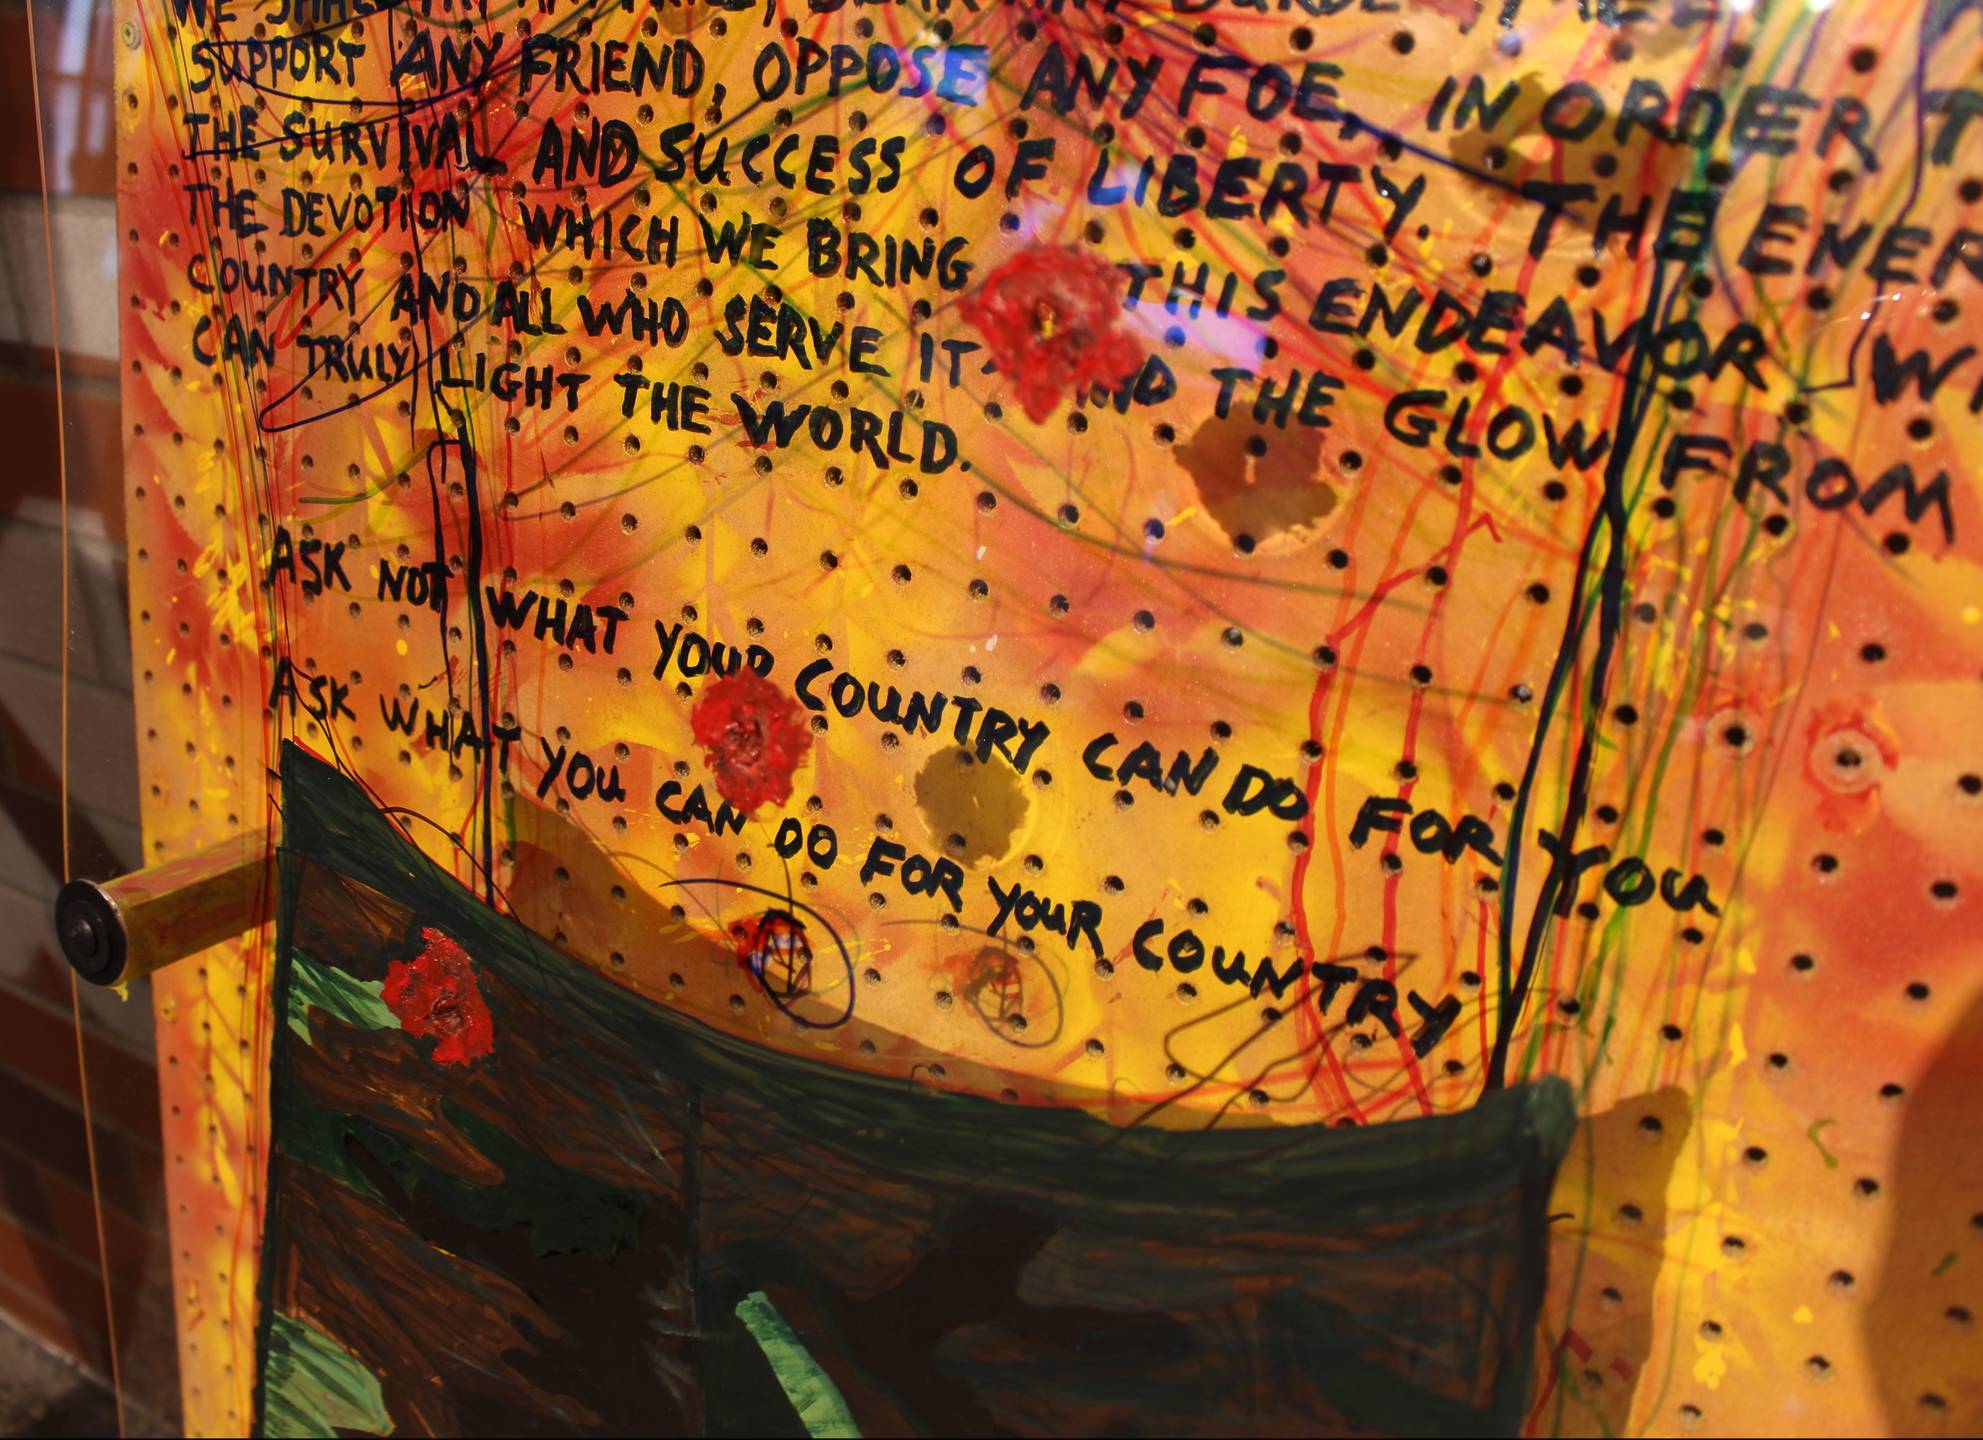 A close up of the art work described above. Includes text: "Ask not what your country can do for you. Ask what you can do for your country."